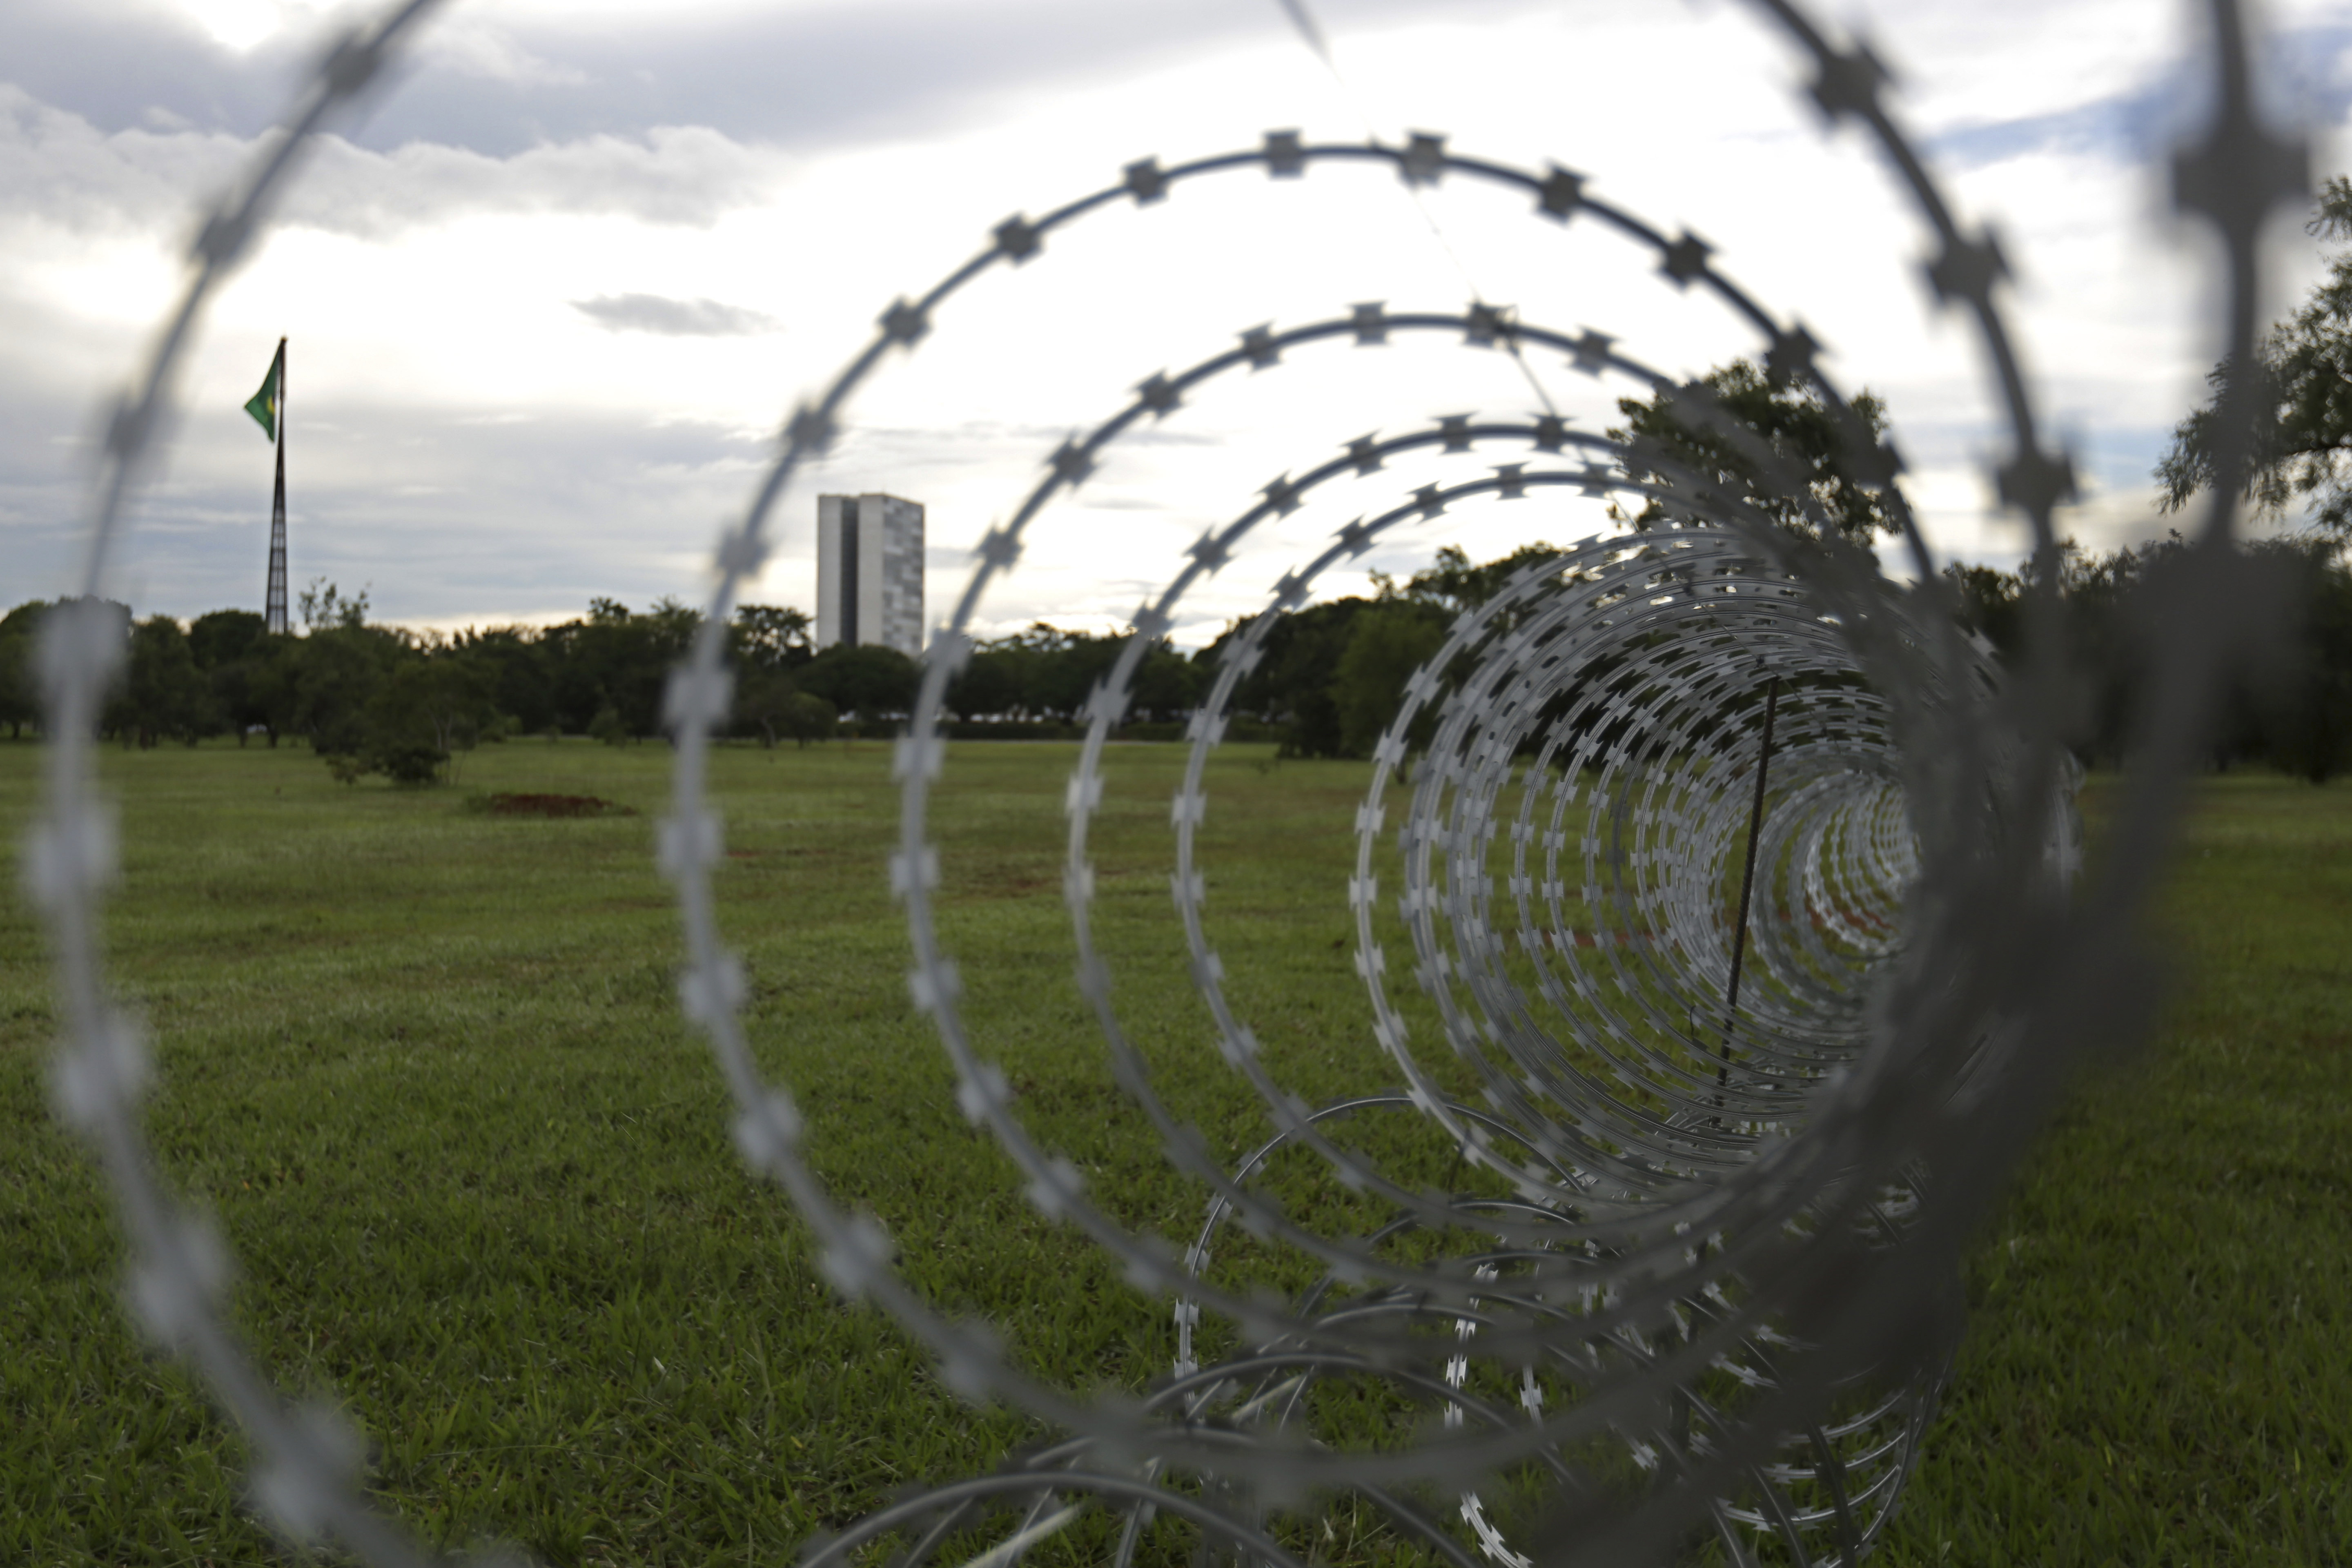 Concertina wire is installed around the Esplanade of Ministries as part of the preparations for the inauguration ceremony for President-elect Jair Bolsonaro, in Brasilia, Brazil, Friday, Dec. 28, 2018. The Secretary of Public Security in Brasilia said that they are expecting as many as 500,000 people to attend the ceremony. Brazil's military has deployed anti-aircraft missiles and fighter jets to protect the event from the air. On the ground, more than 3,000 police and military will take to the streets. (AP Photo/Eraldo Peres)